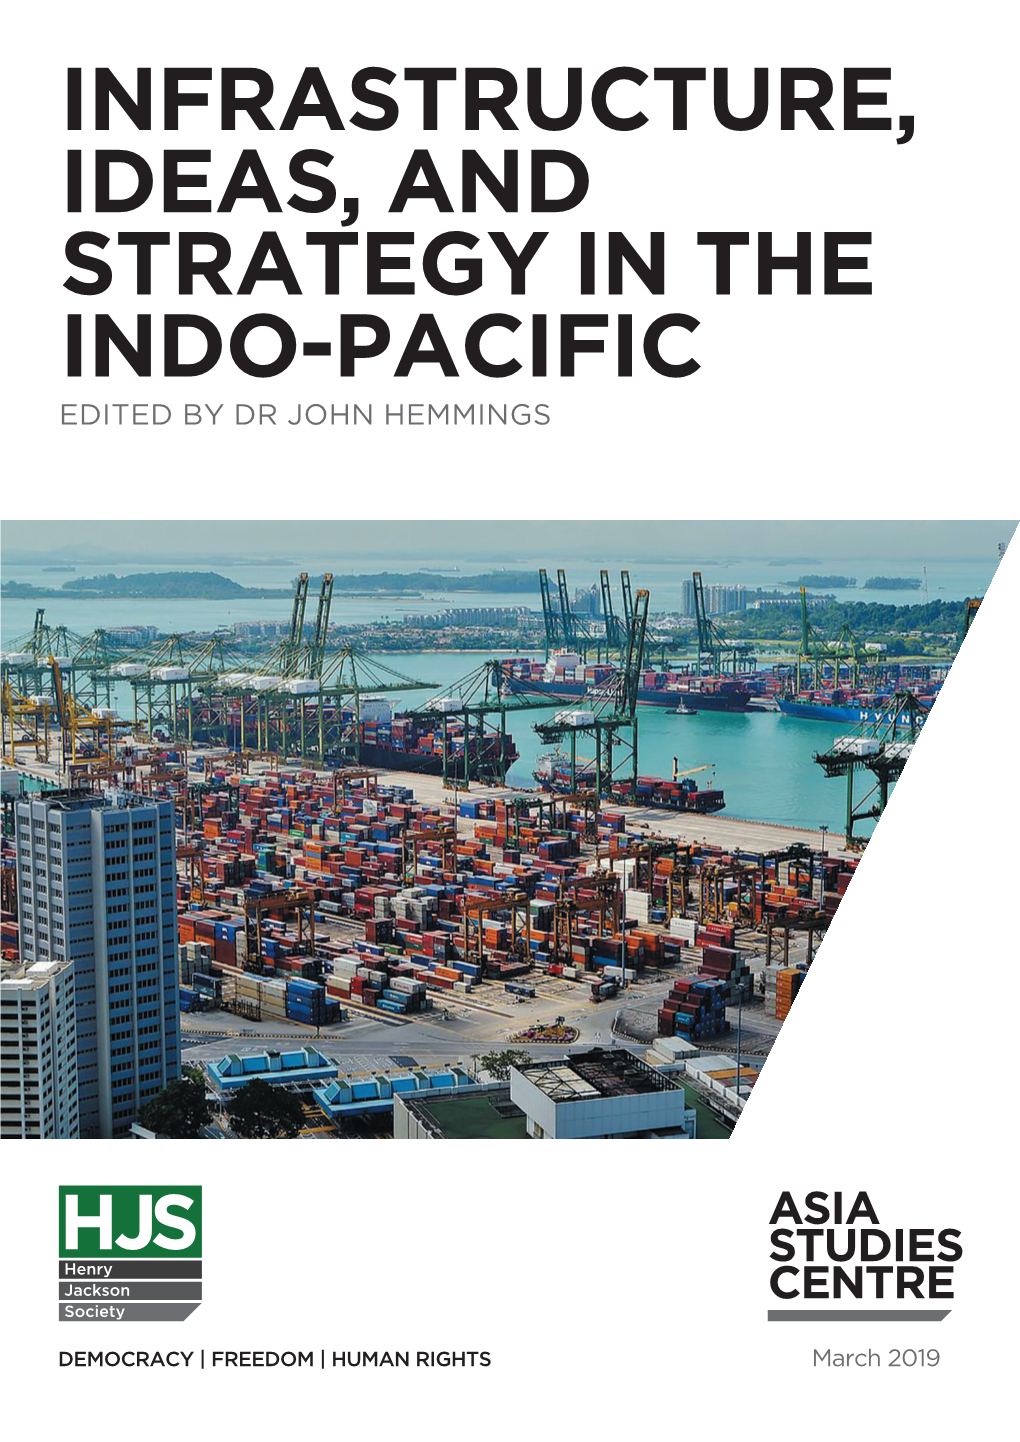 Infrastructure, Ideas, and Strategy in the Indo-Pacific Edited by Dr John Hemmings